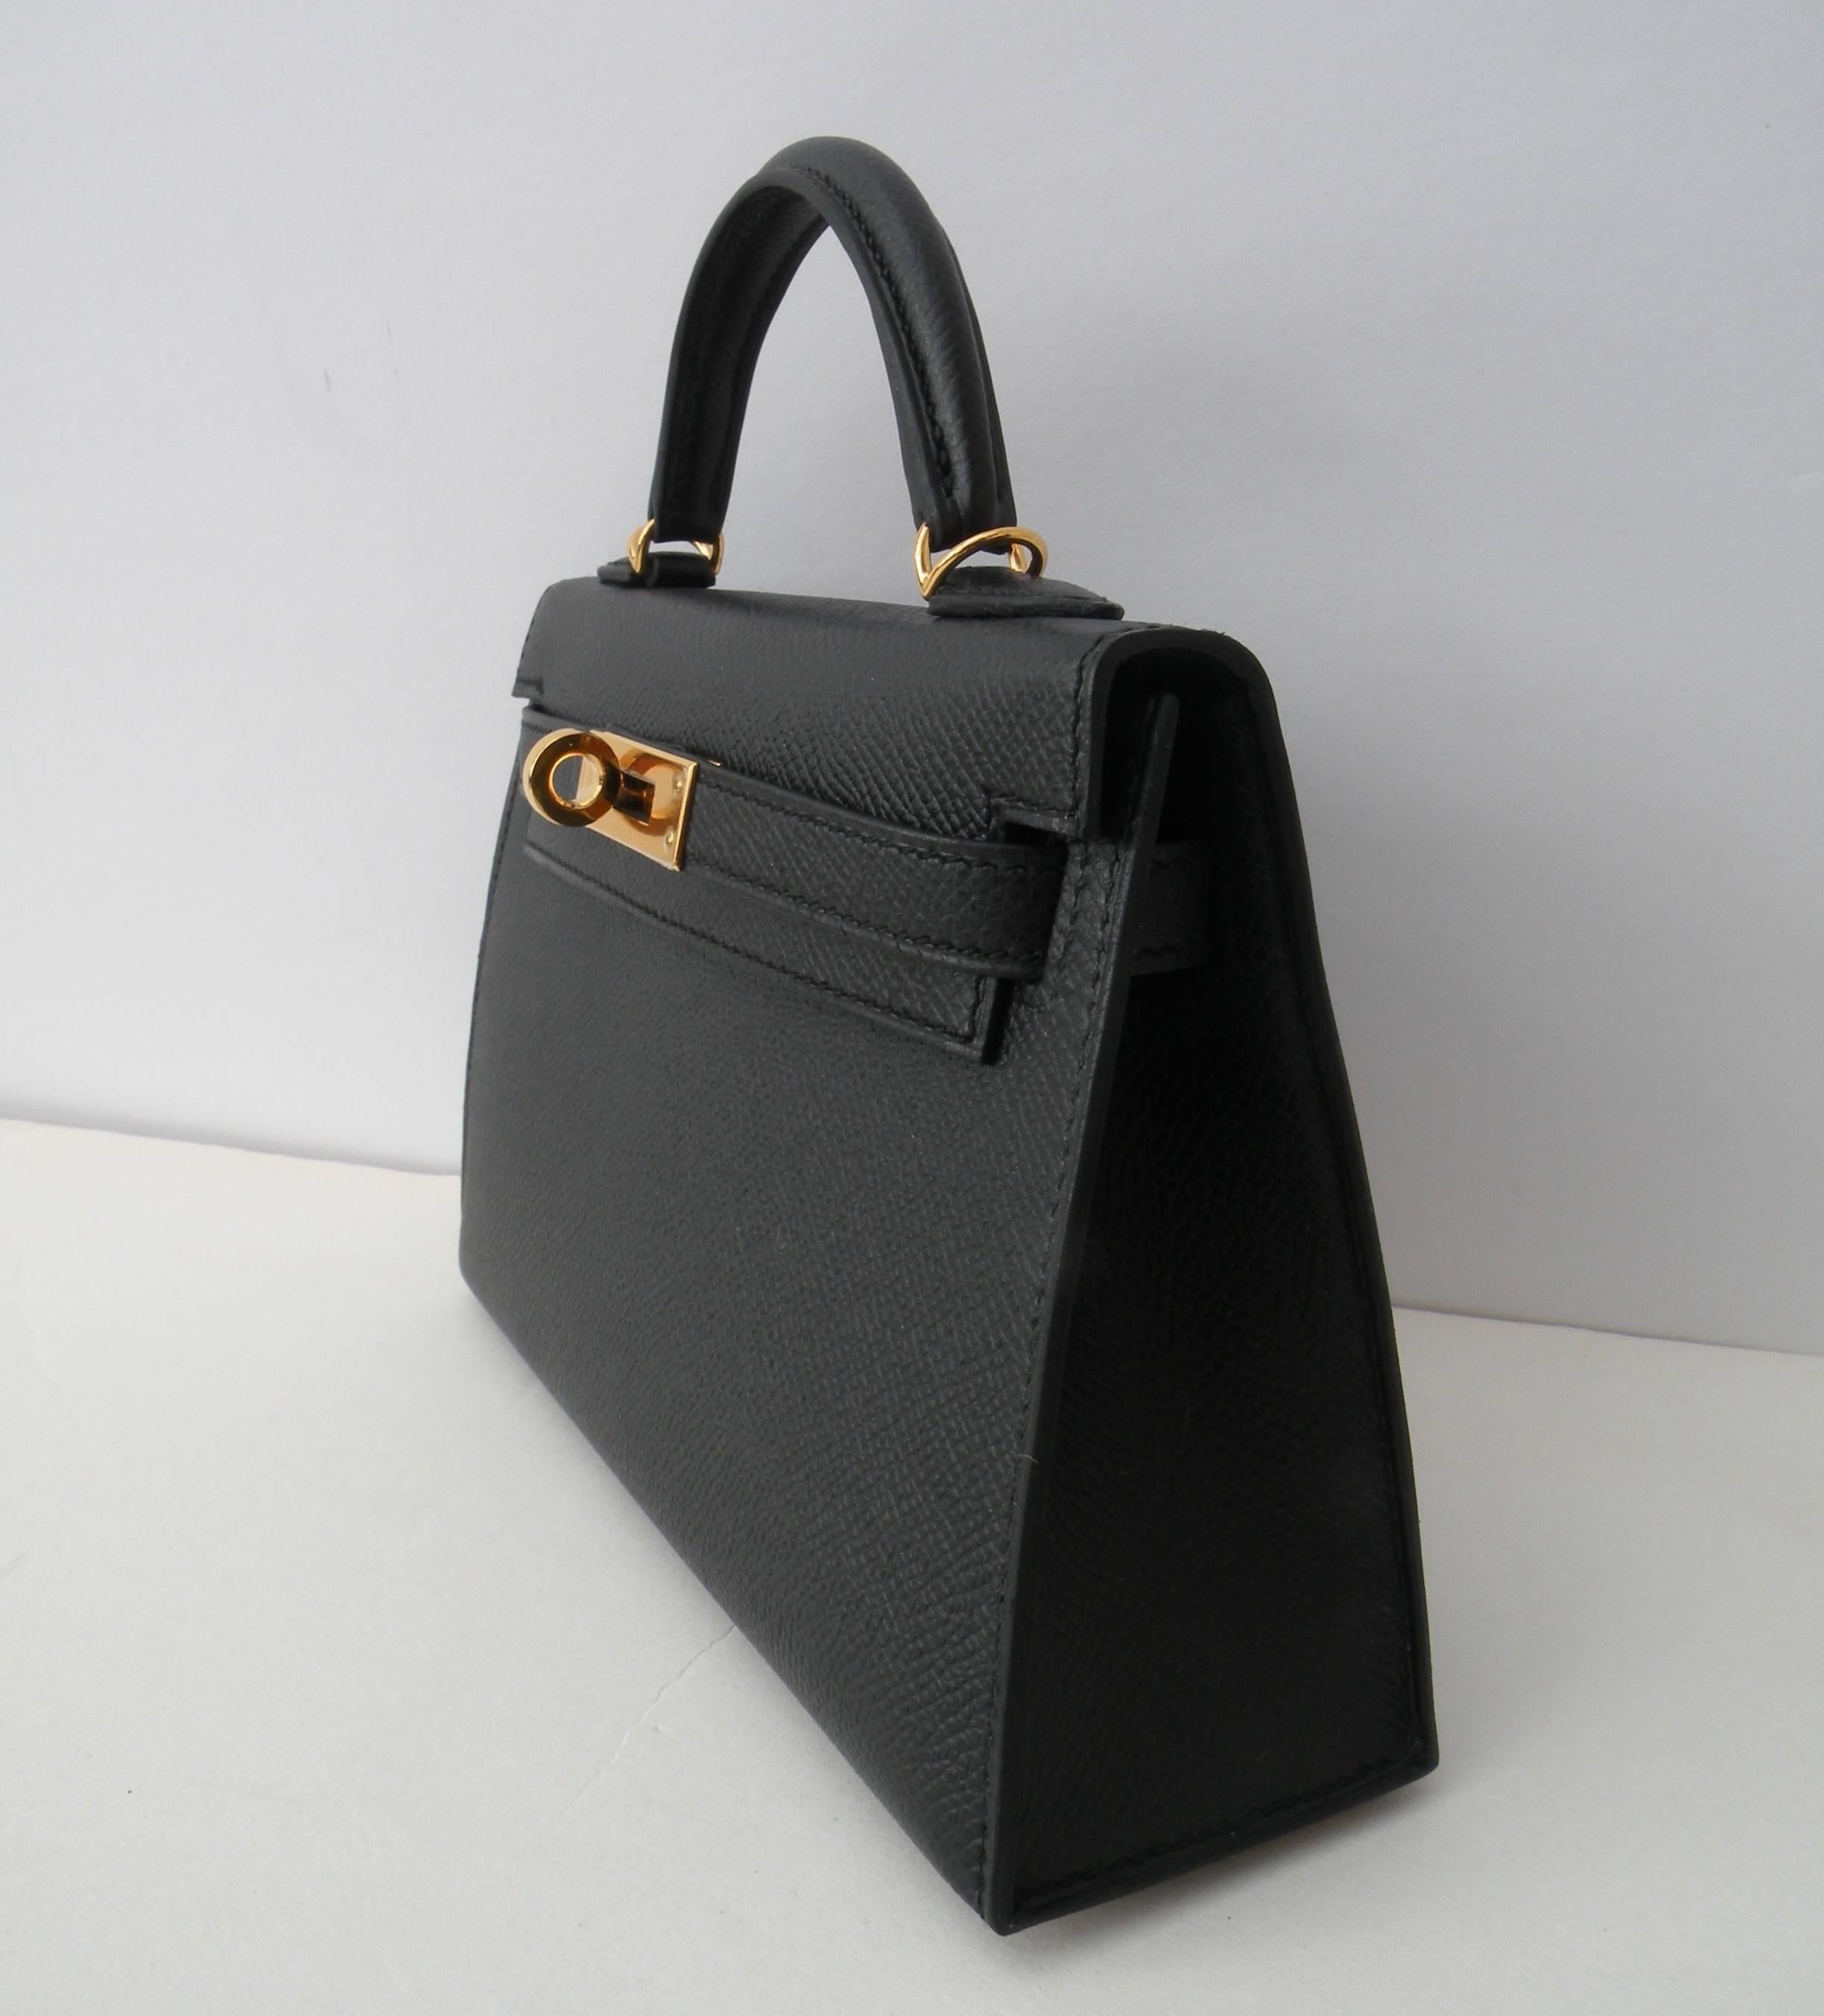 Hermes Mini Kelly Bag 
Size: 20cm
Color: Black
Leather: Epsom
Hardware: Gold

Hermes Kelly Bag done in 20cm, a new size and shape just introduced from Hermes.  It quickly sold out to their VIP clients!
Very Rare,  a Collectors Item!
You cant go